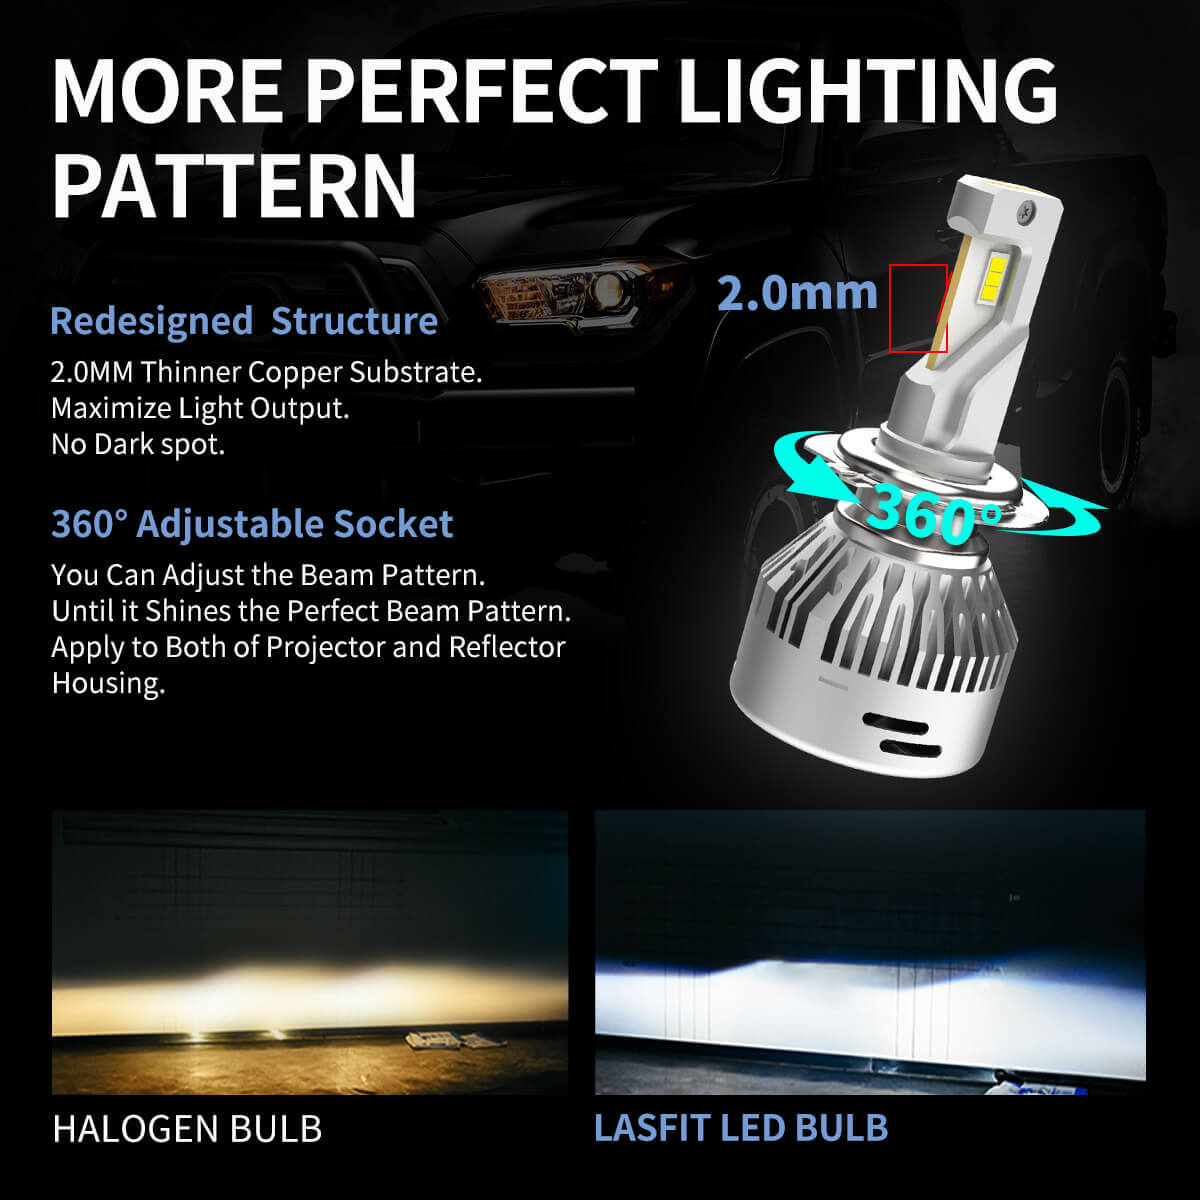 H7 LED Headlight Kit - 6000K 8000LM with Philips ZES Chips